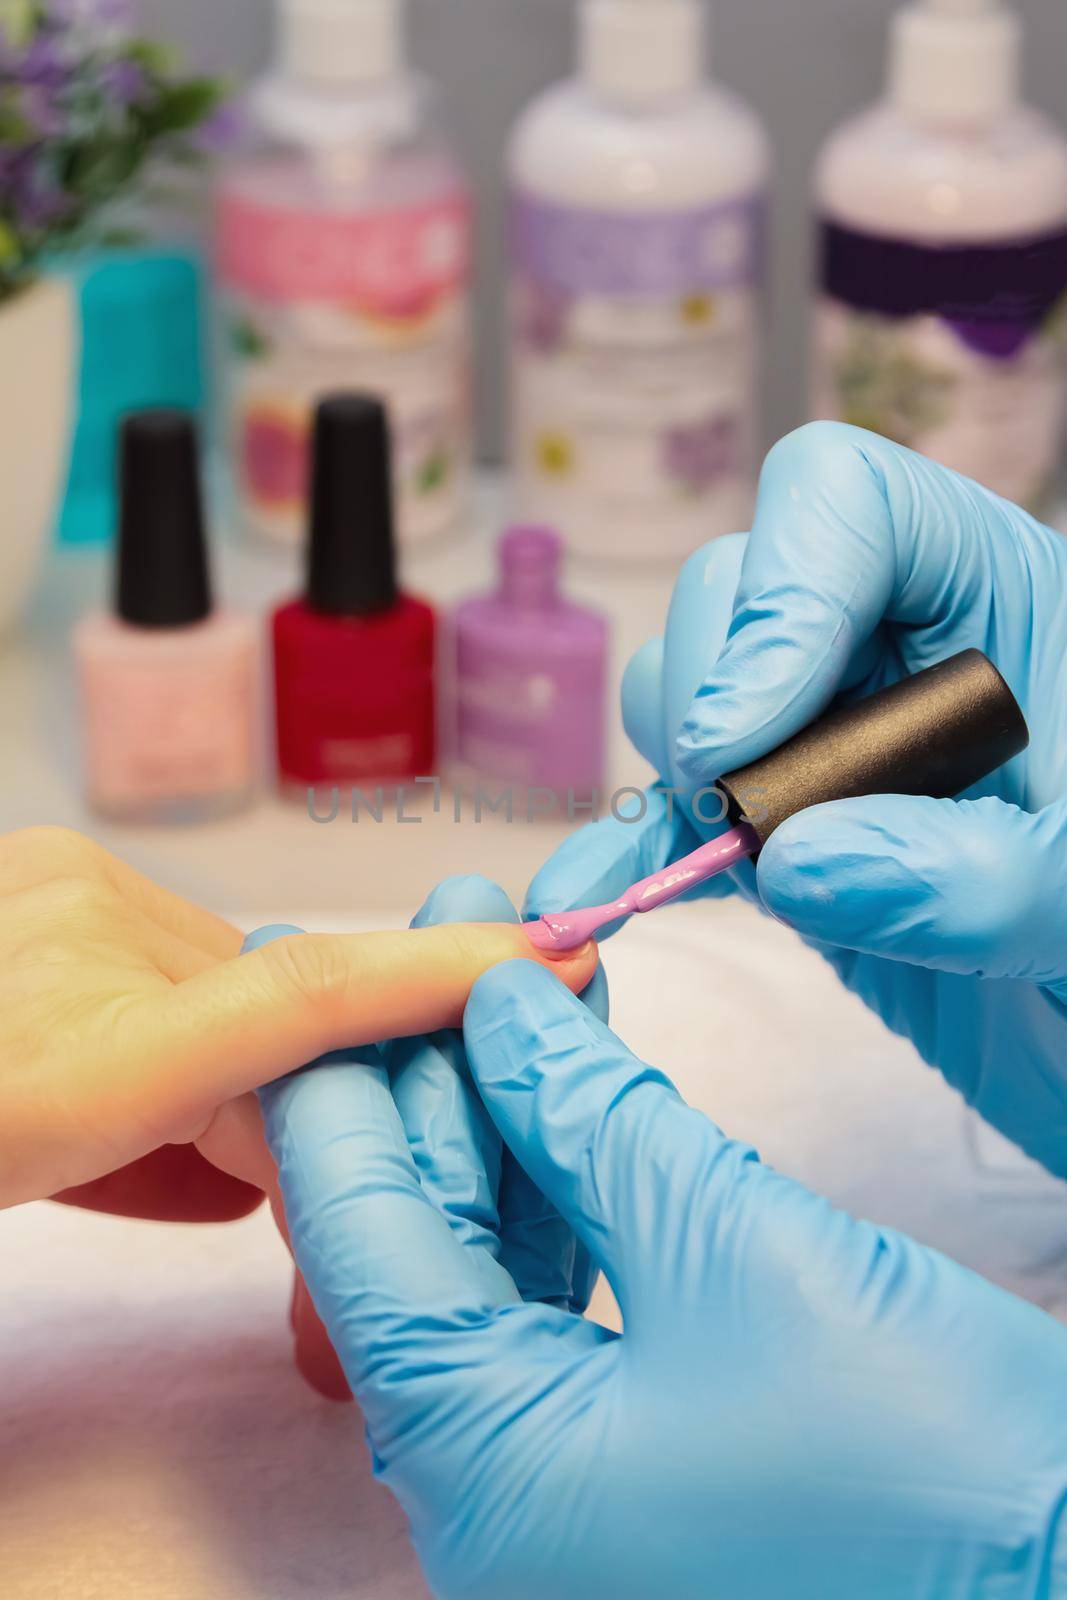 In a beauty salon, a woman is given a manicure, a nail is painted with varnish. Close-up.